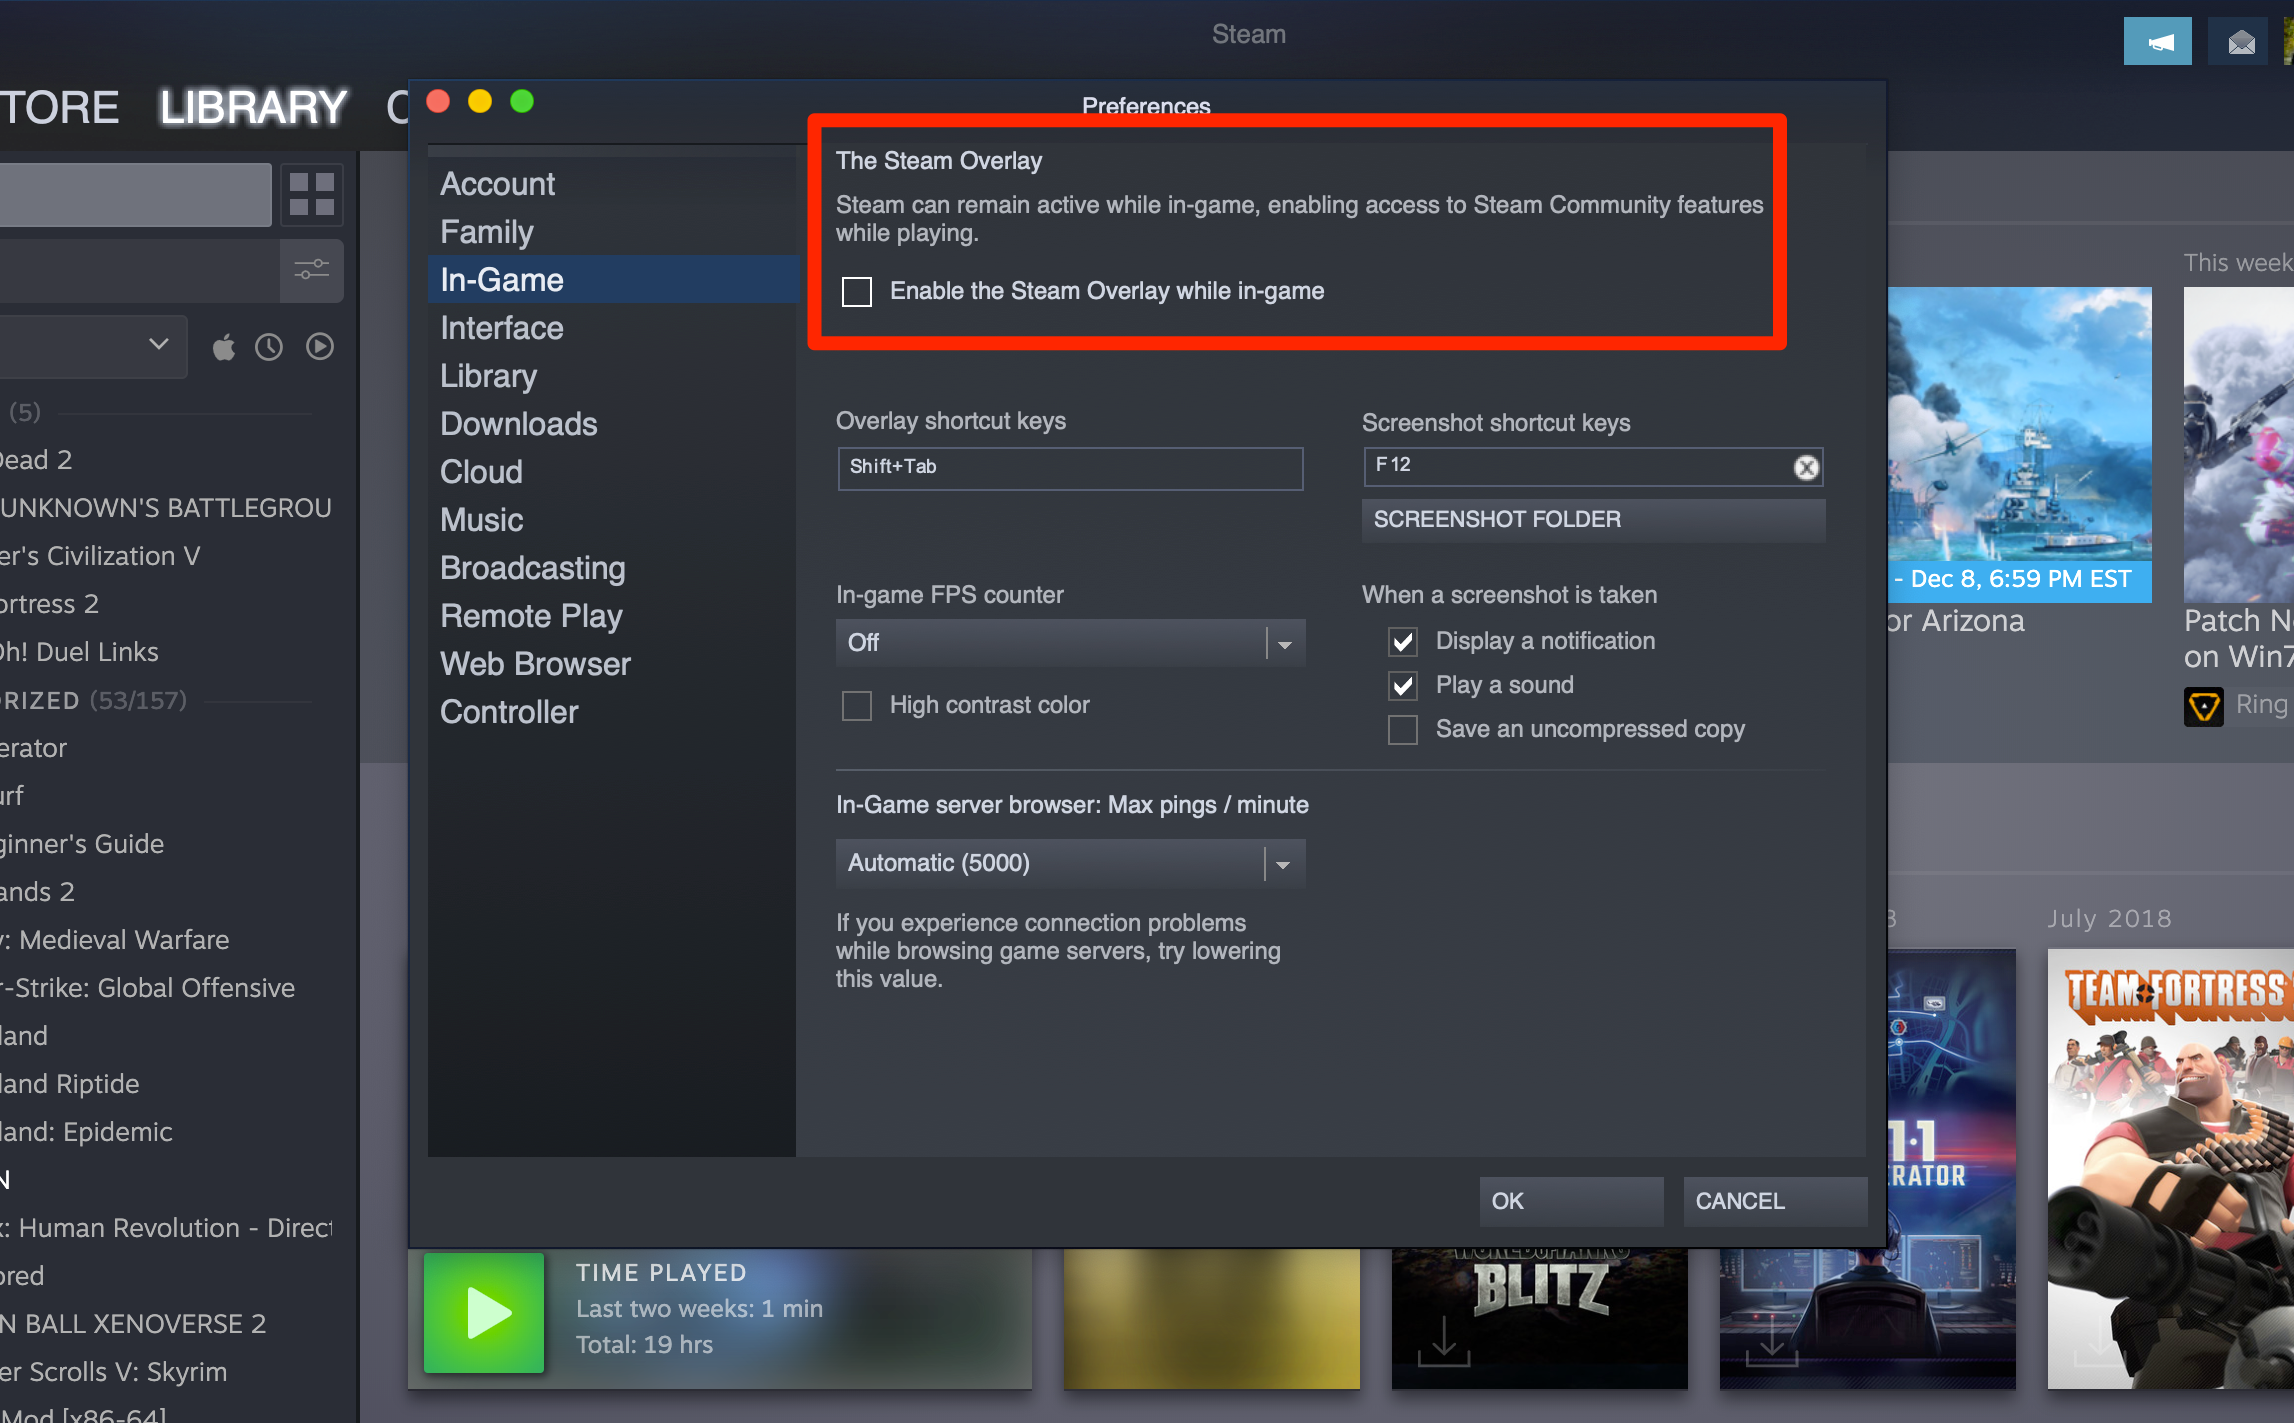 Check or uncheck Steam Overlay in game